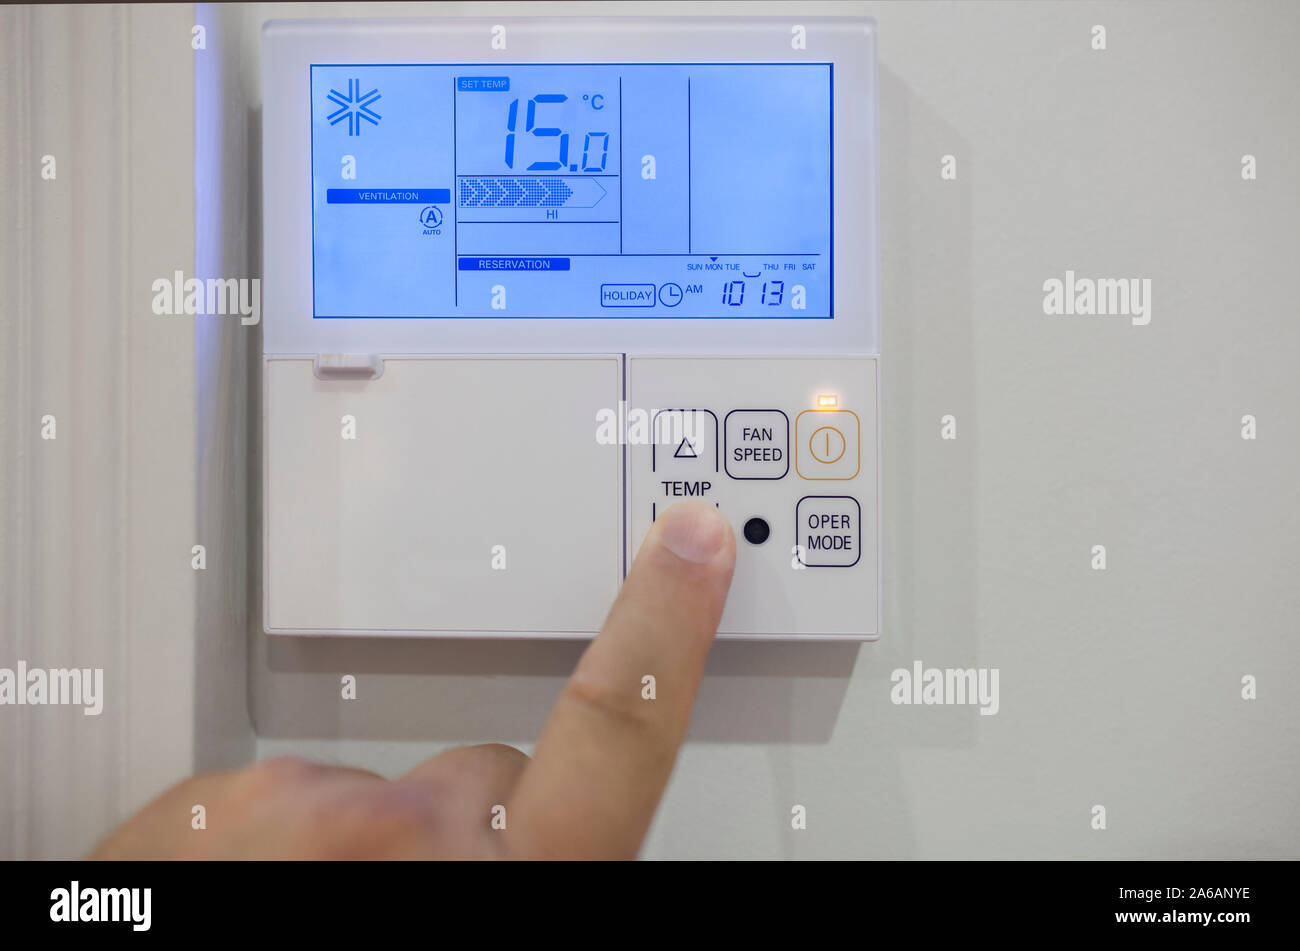 Adjusting room climate control with electronic device at home. Finger pressing for 15 celsius degrees Stock Photo